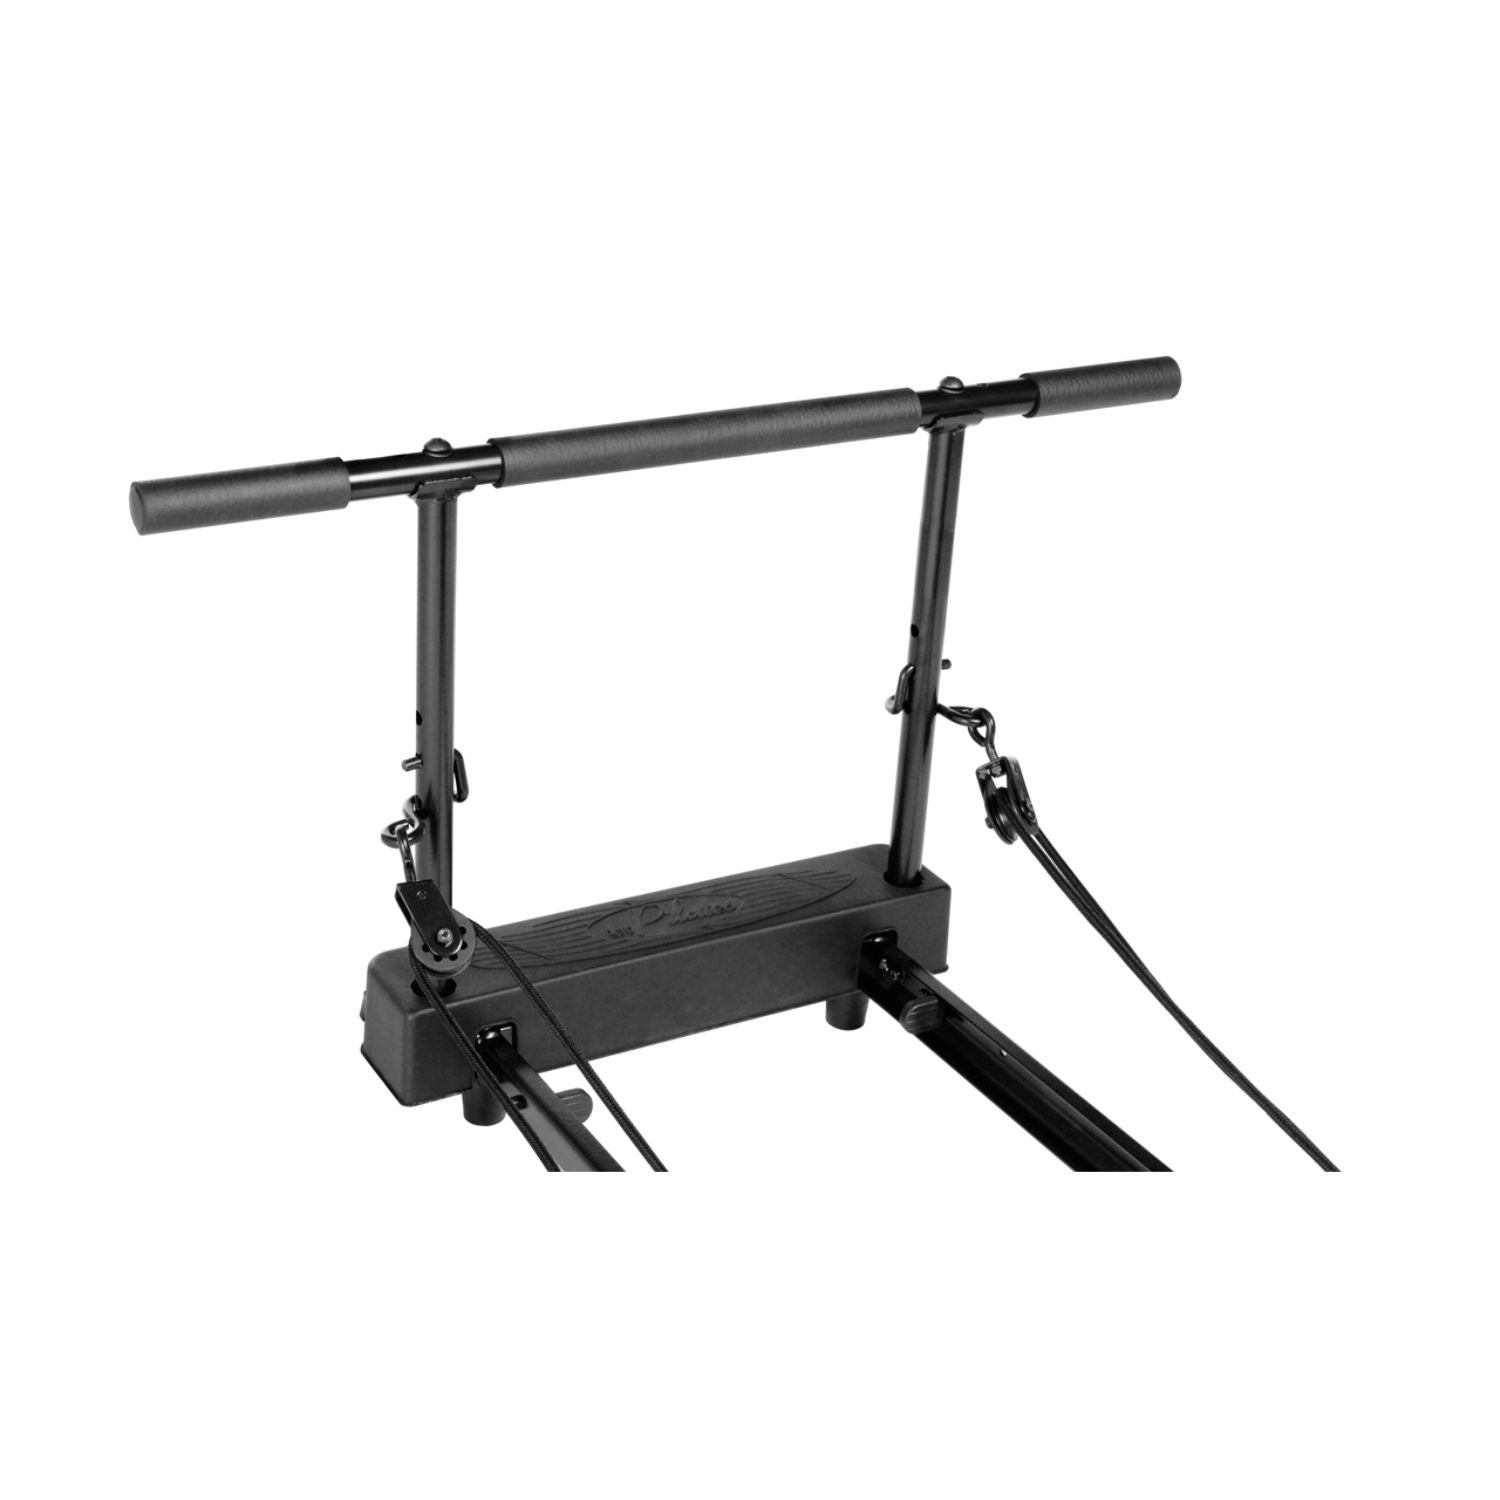 AeroPilates Precision Series Reformer 610 with Optional Cadillac  Cadillac  accessories, Pilates reformer exercises, No equipment workout